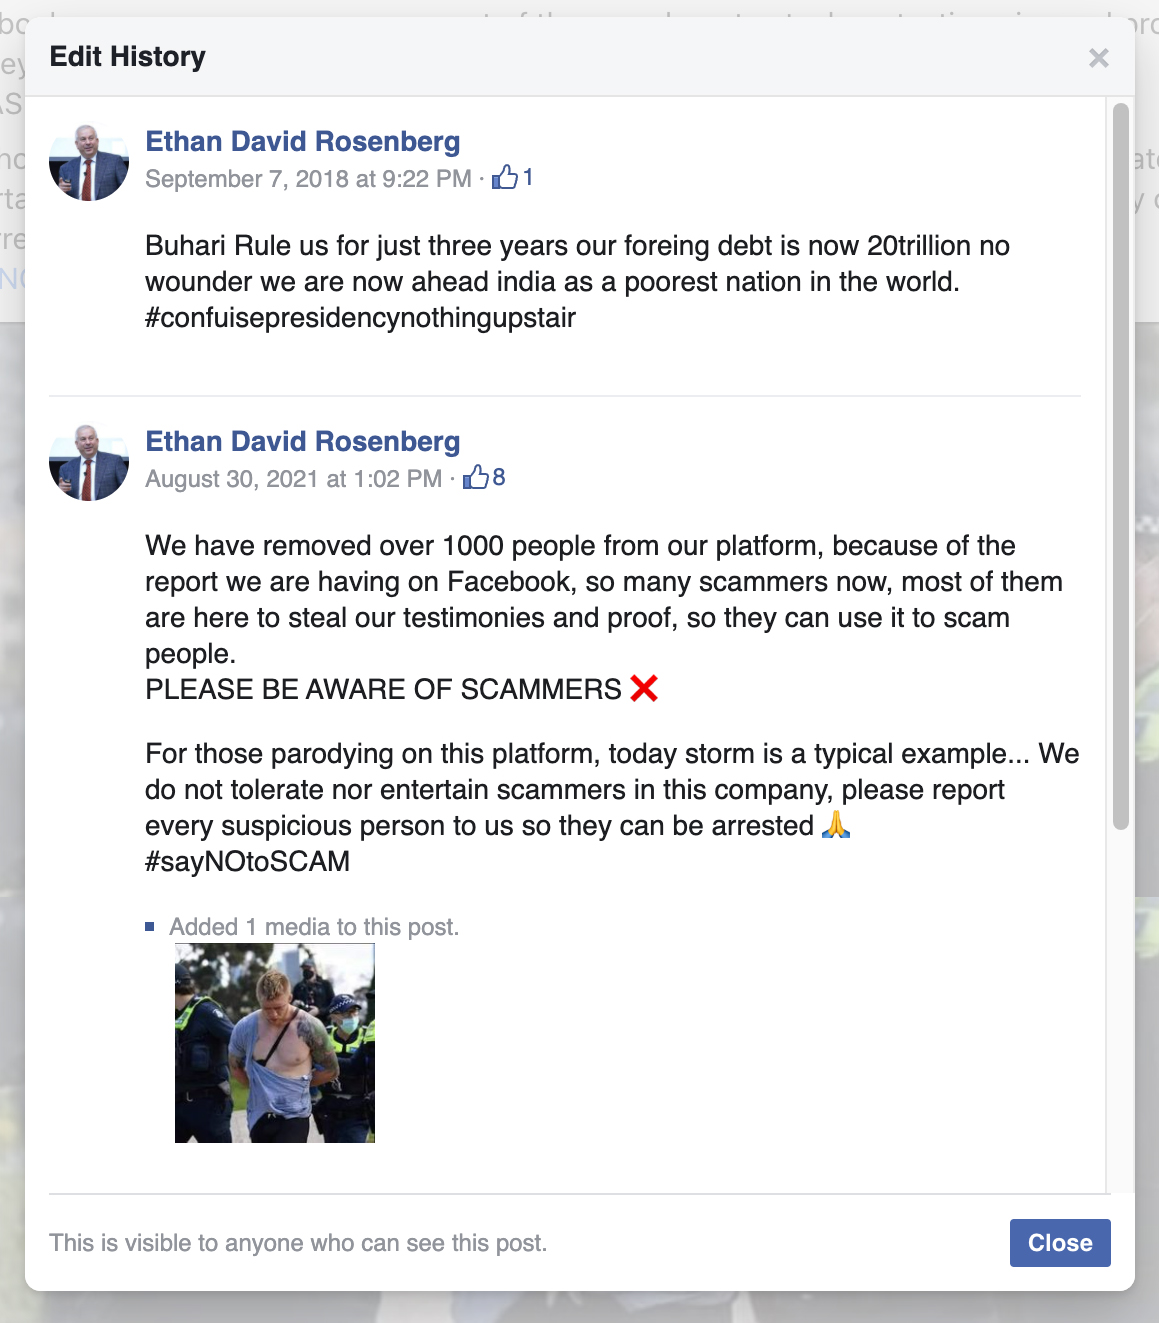 Ethan David Rosenberg is a Facebook profile run by crypto scammers and had nothing to do with the real David Rosenberg of Rosenberg Research.